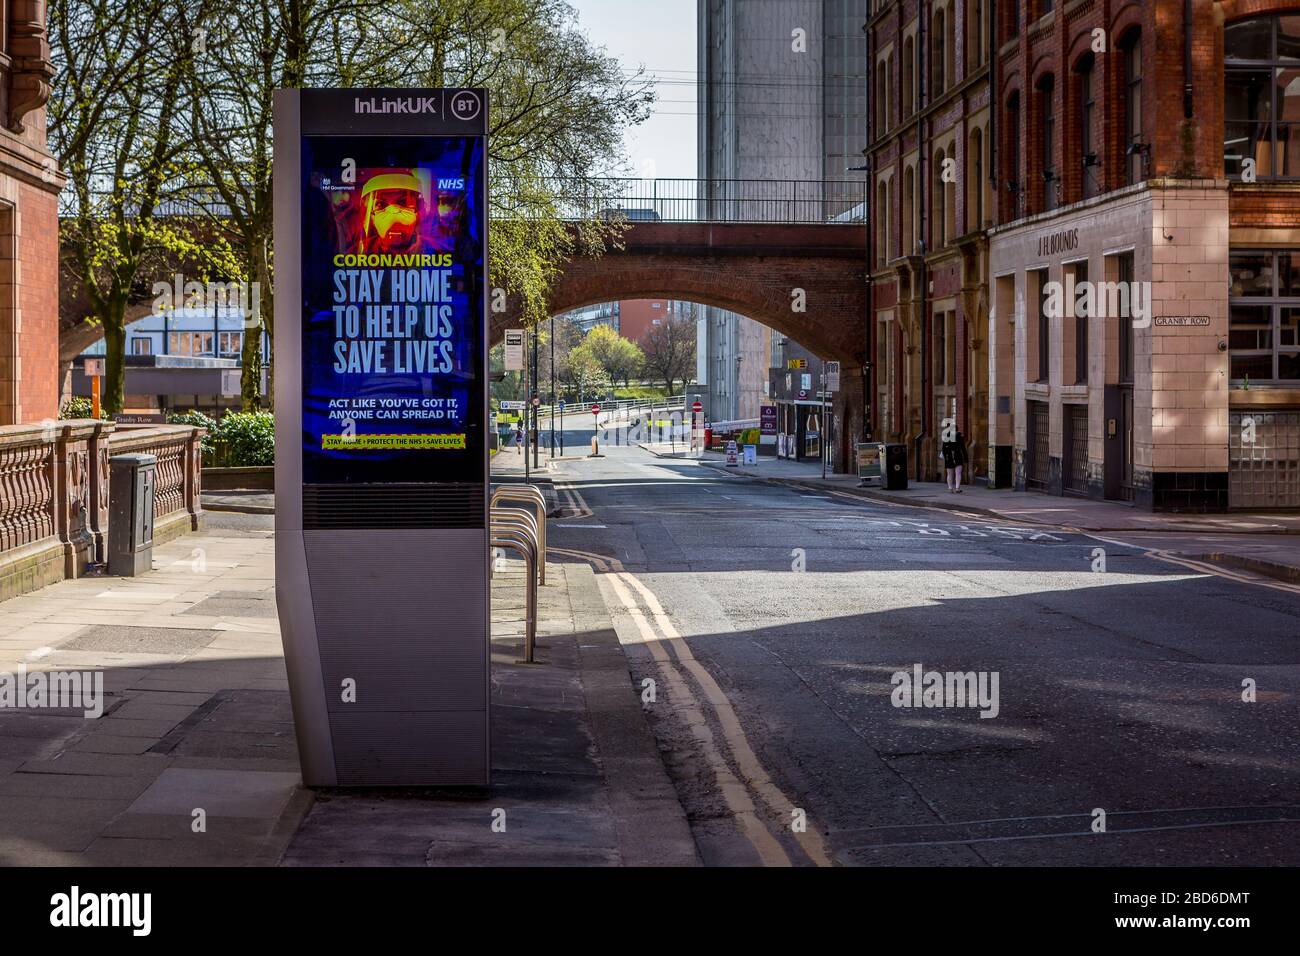 'Stay Home Save Lives' signs, Coronavirus Outbreak, Manchester City Centre, United Kingdom, April 2020. Stock Photo